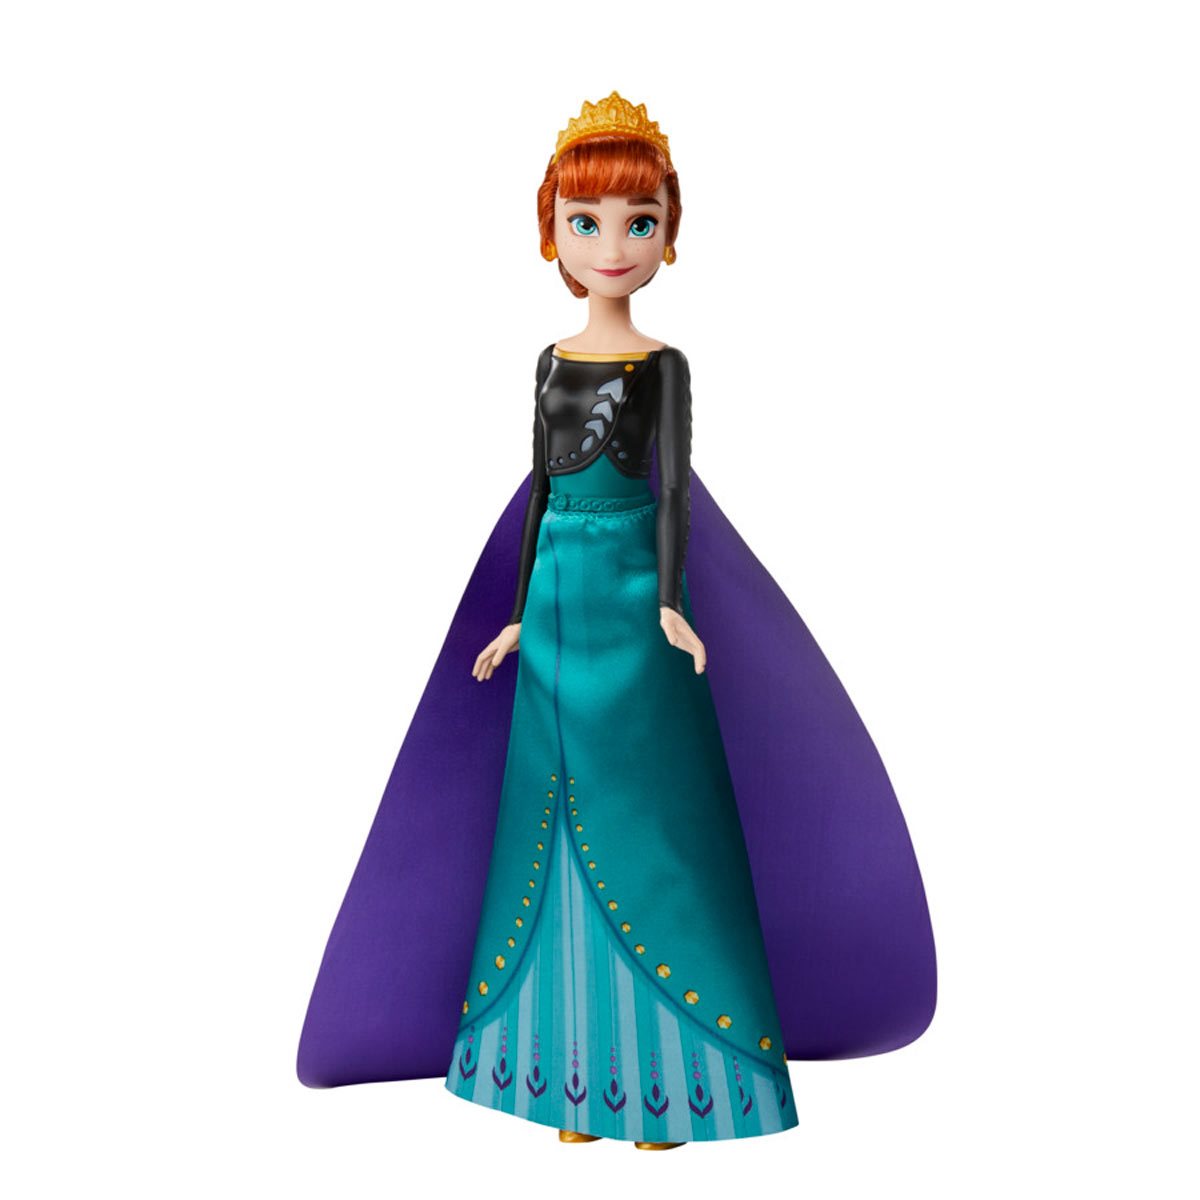 Disney Frozen 2 Queen Elsa Small Doll With Removable Cape Toys for Kids 3 for sale online 